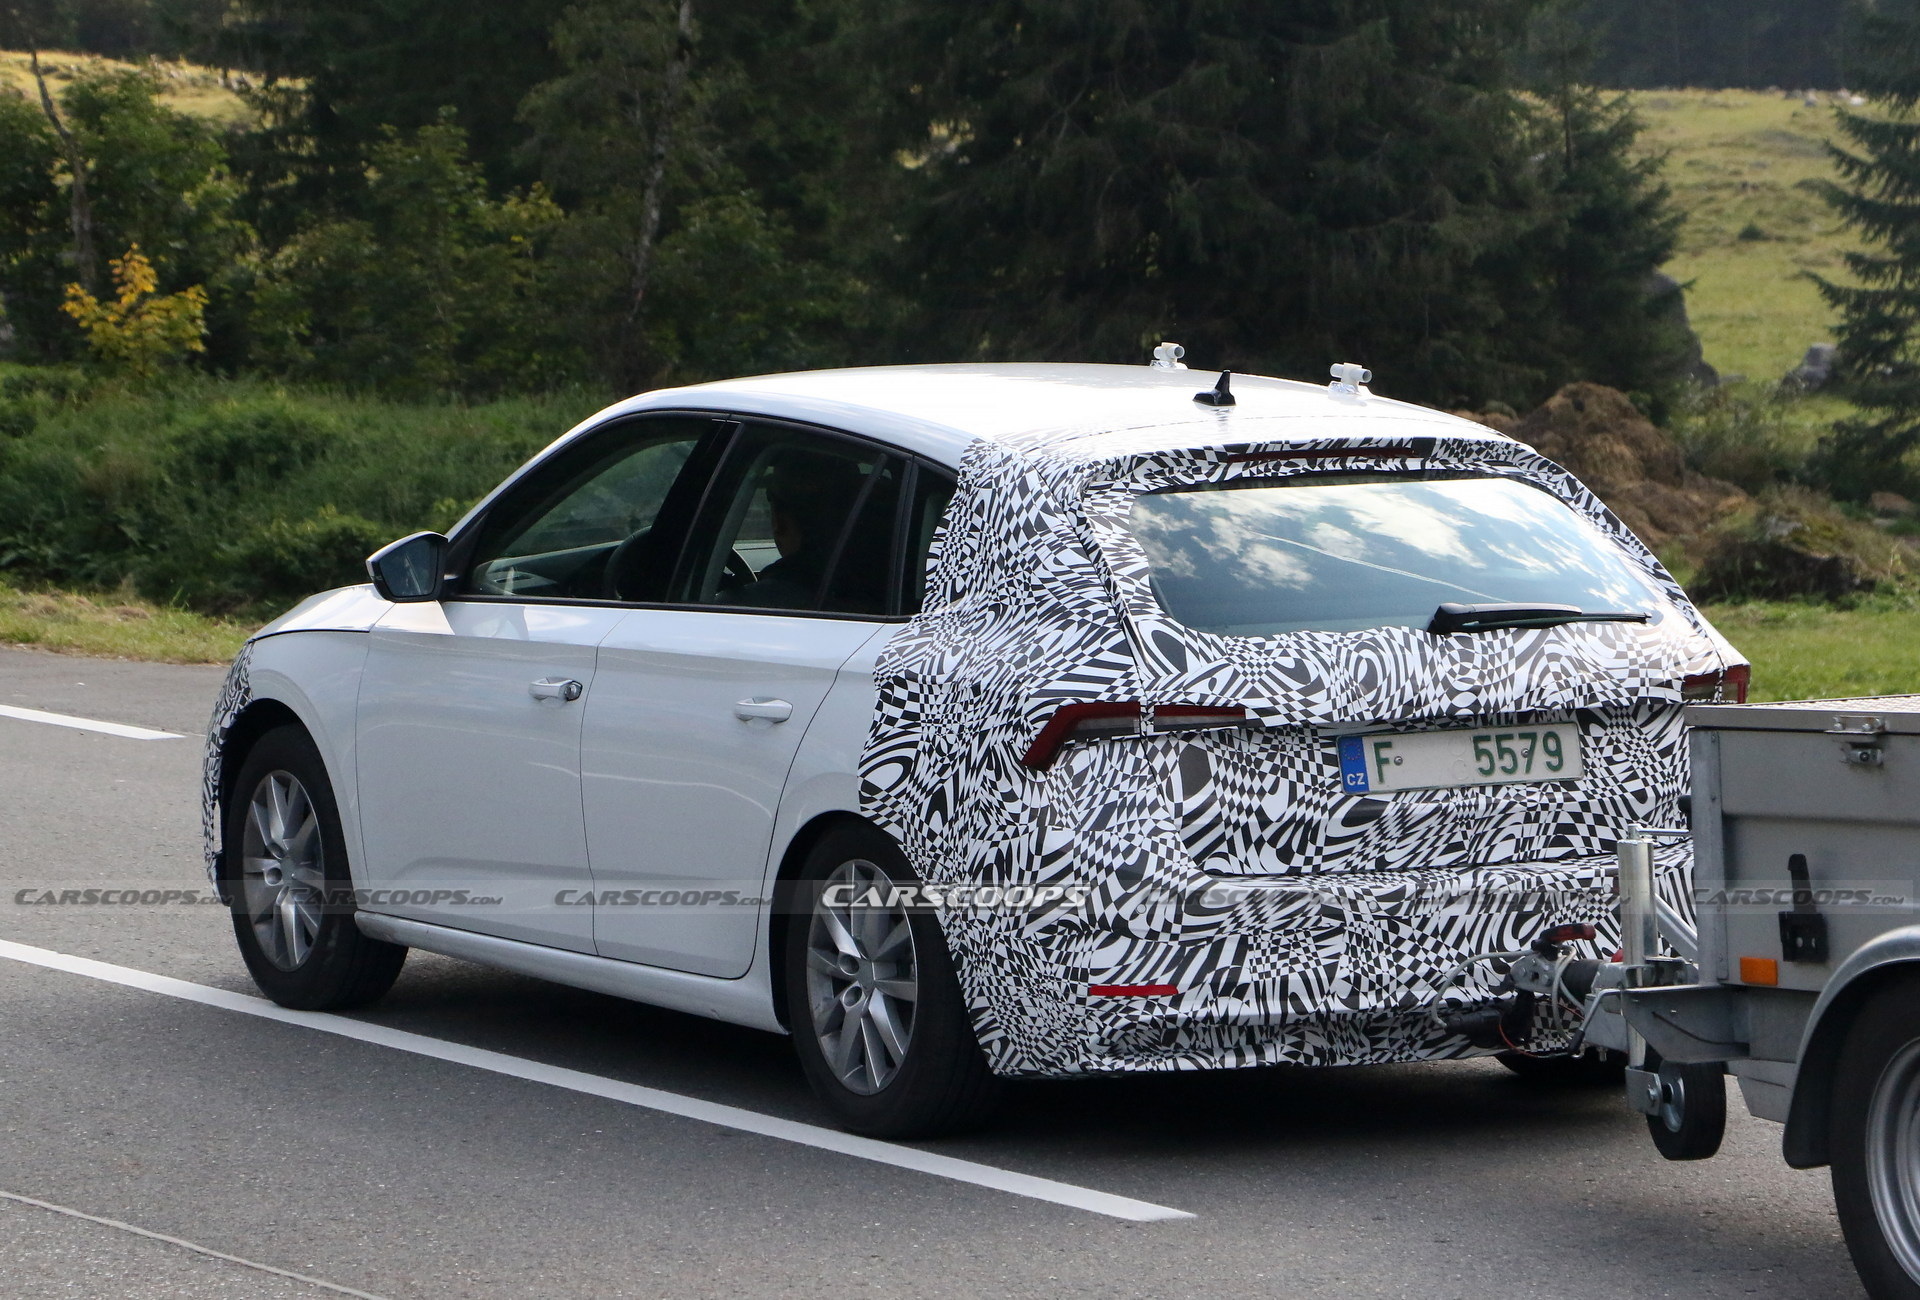 Skoda Scala Compact Hatchback Getting Ready For A Mid-Life Cycle